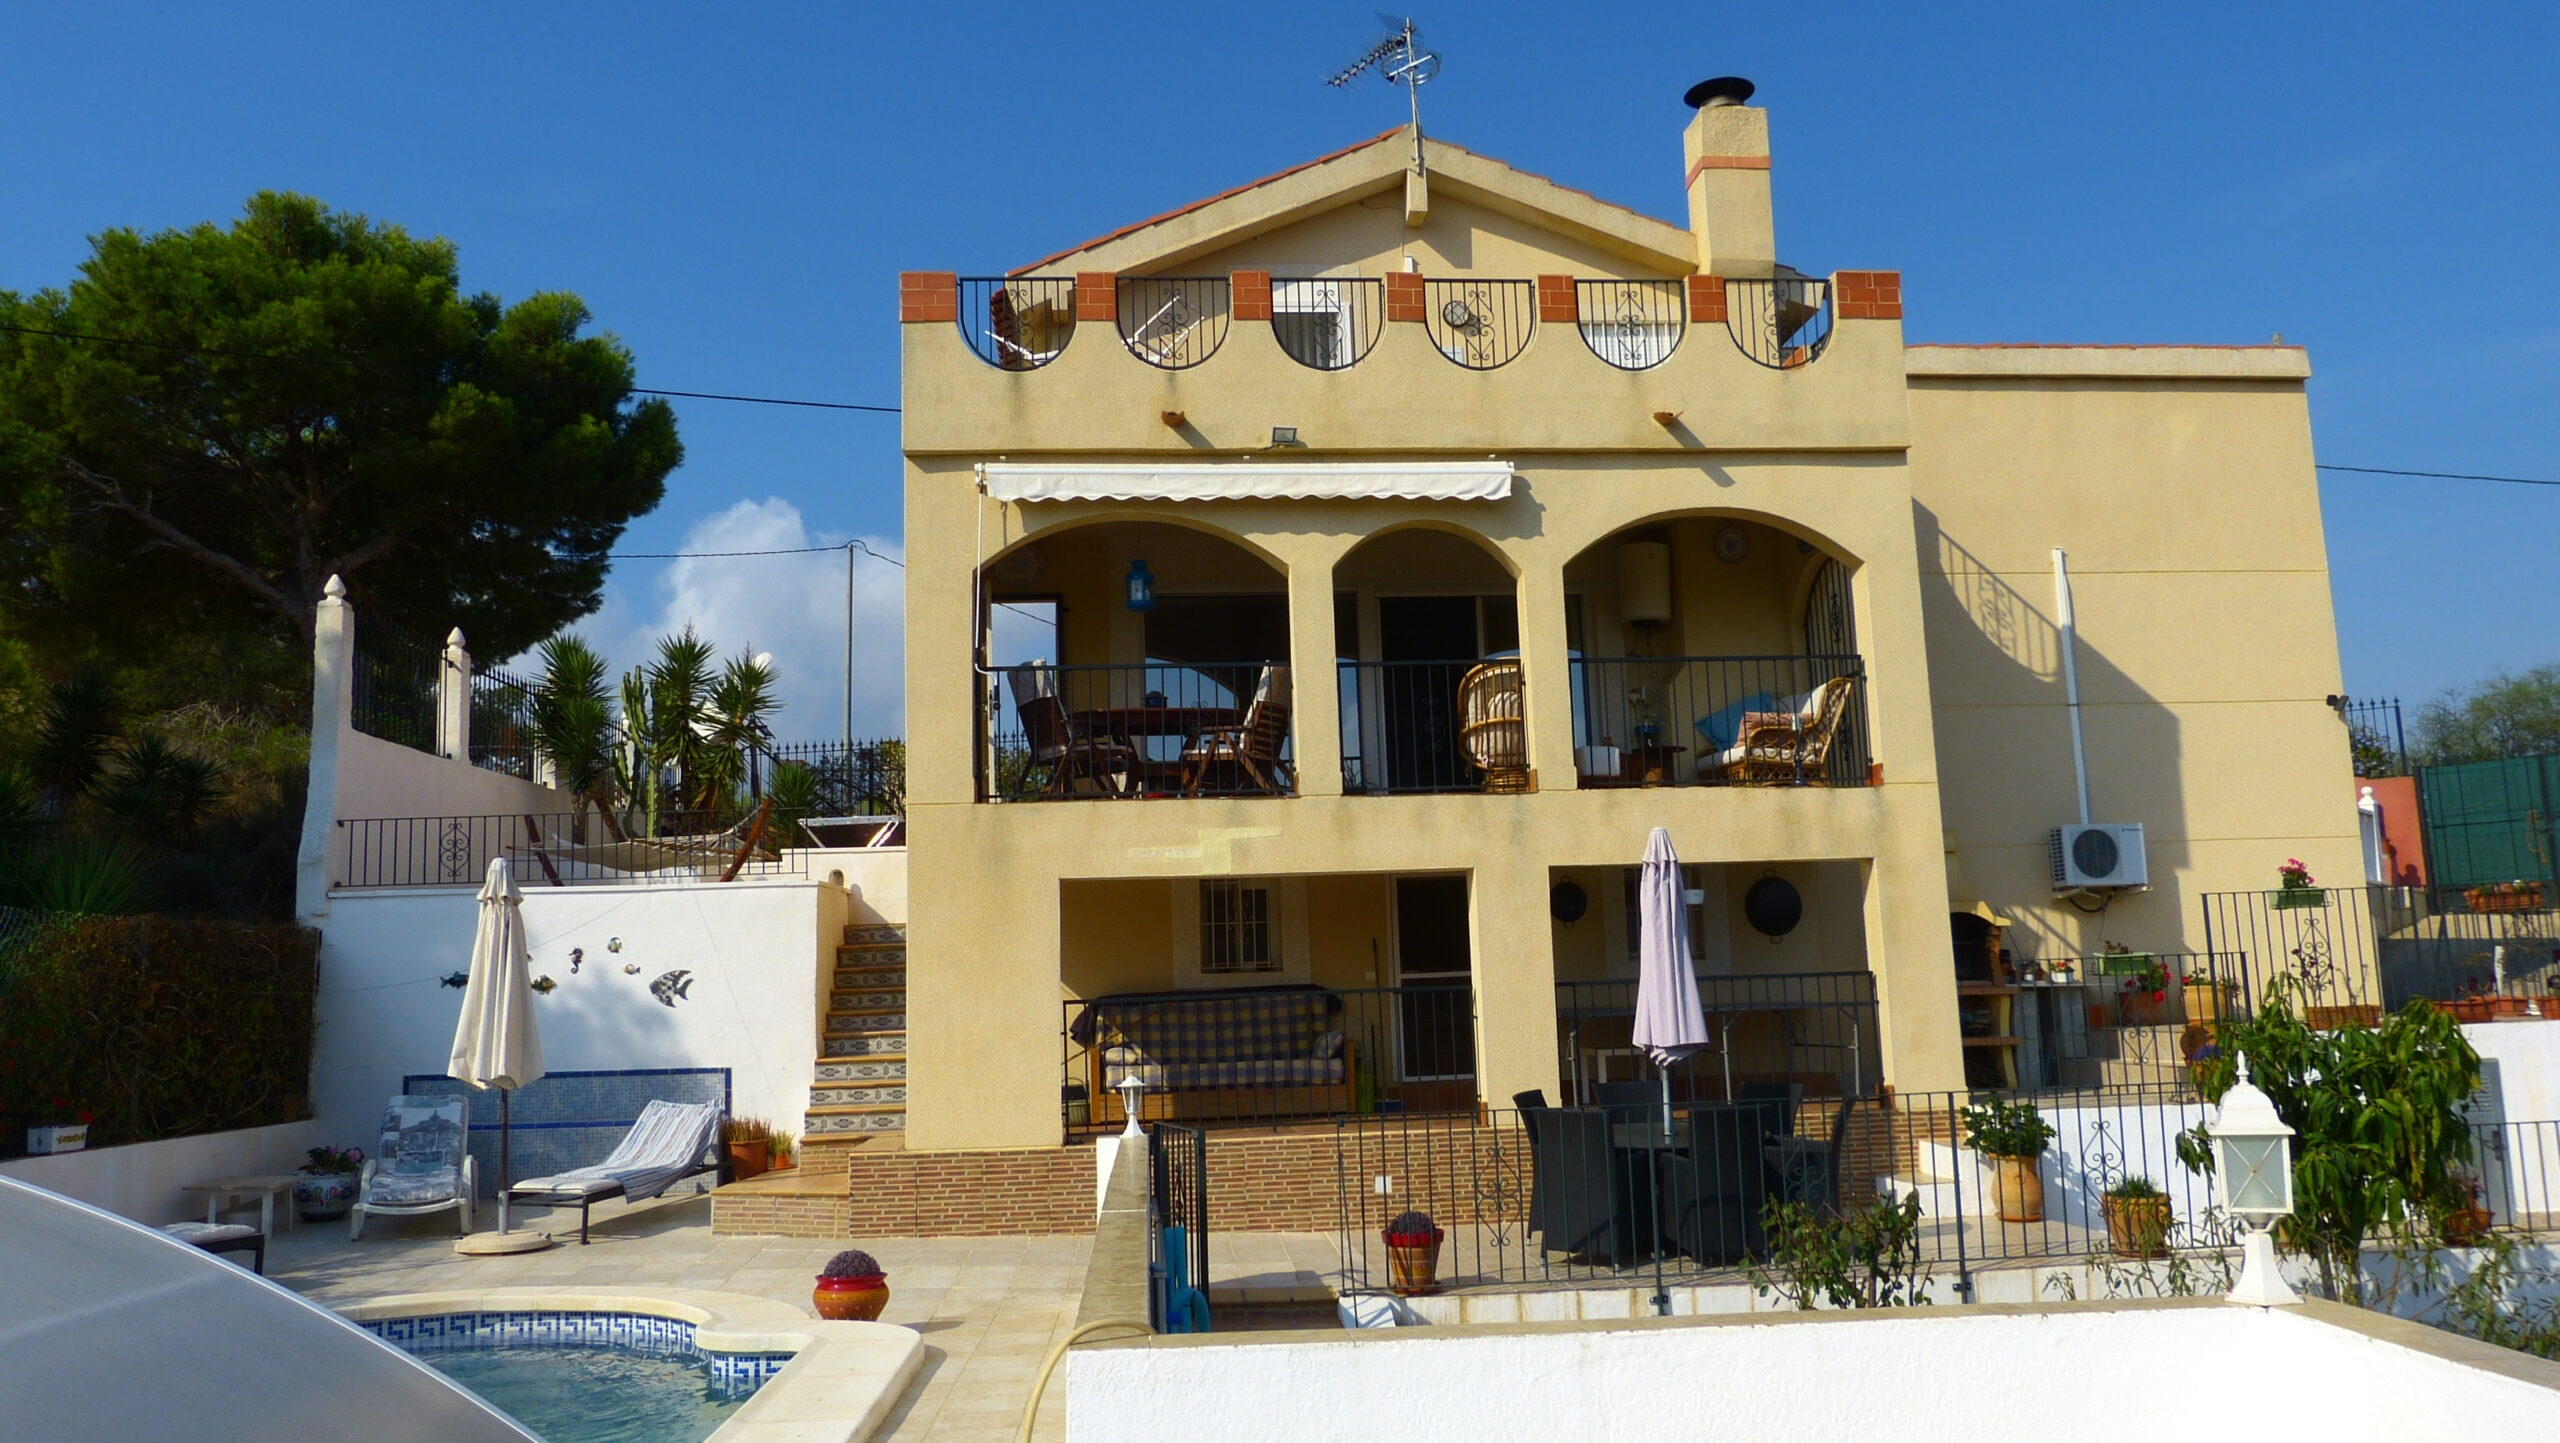 Detached Country Villa with Pool